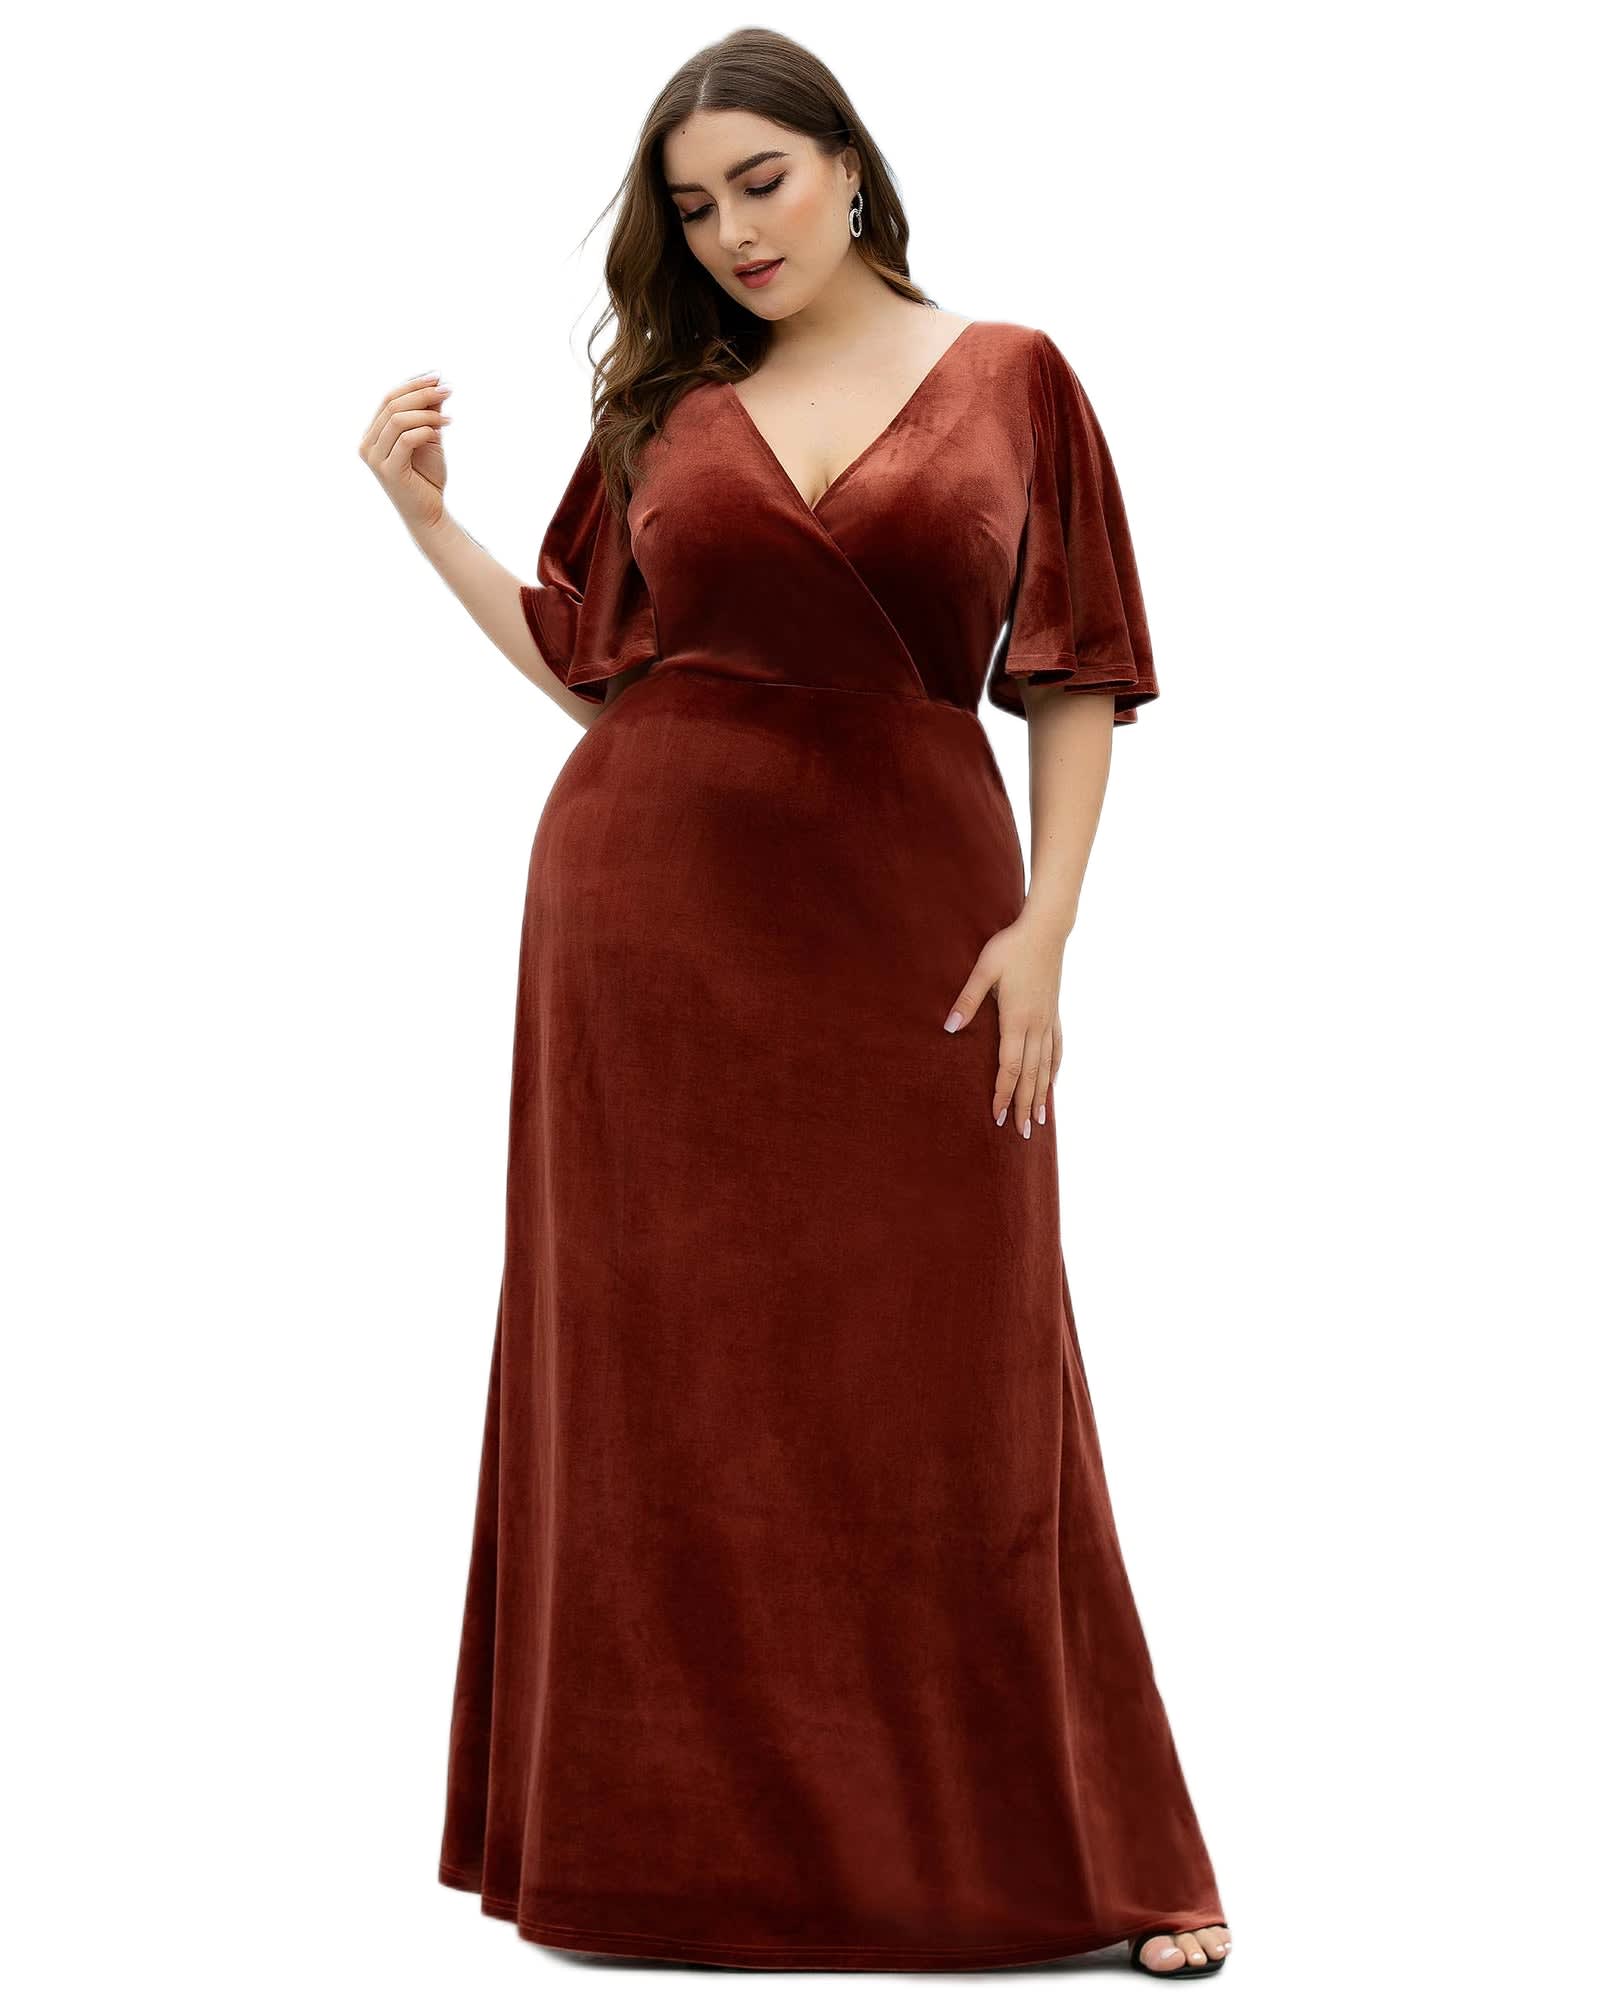 Elegant Red Dresses for a Memorable Christmas Party